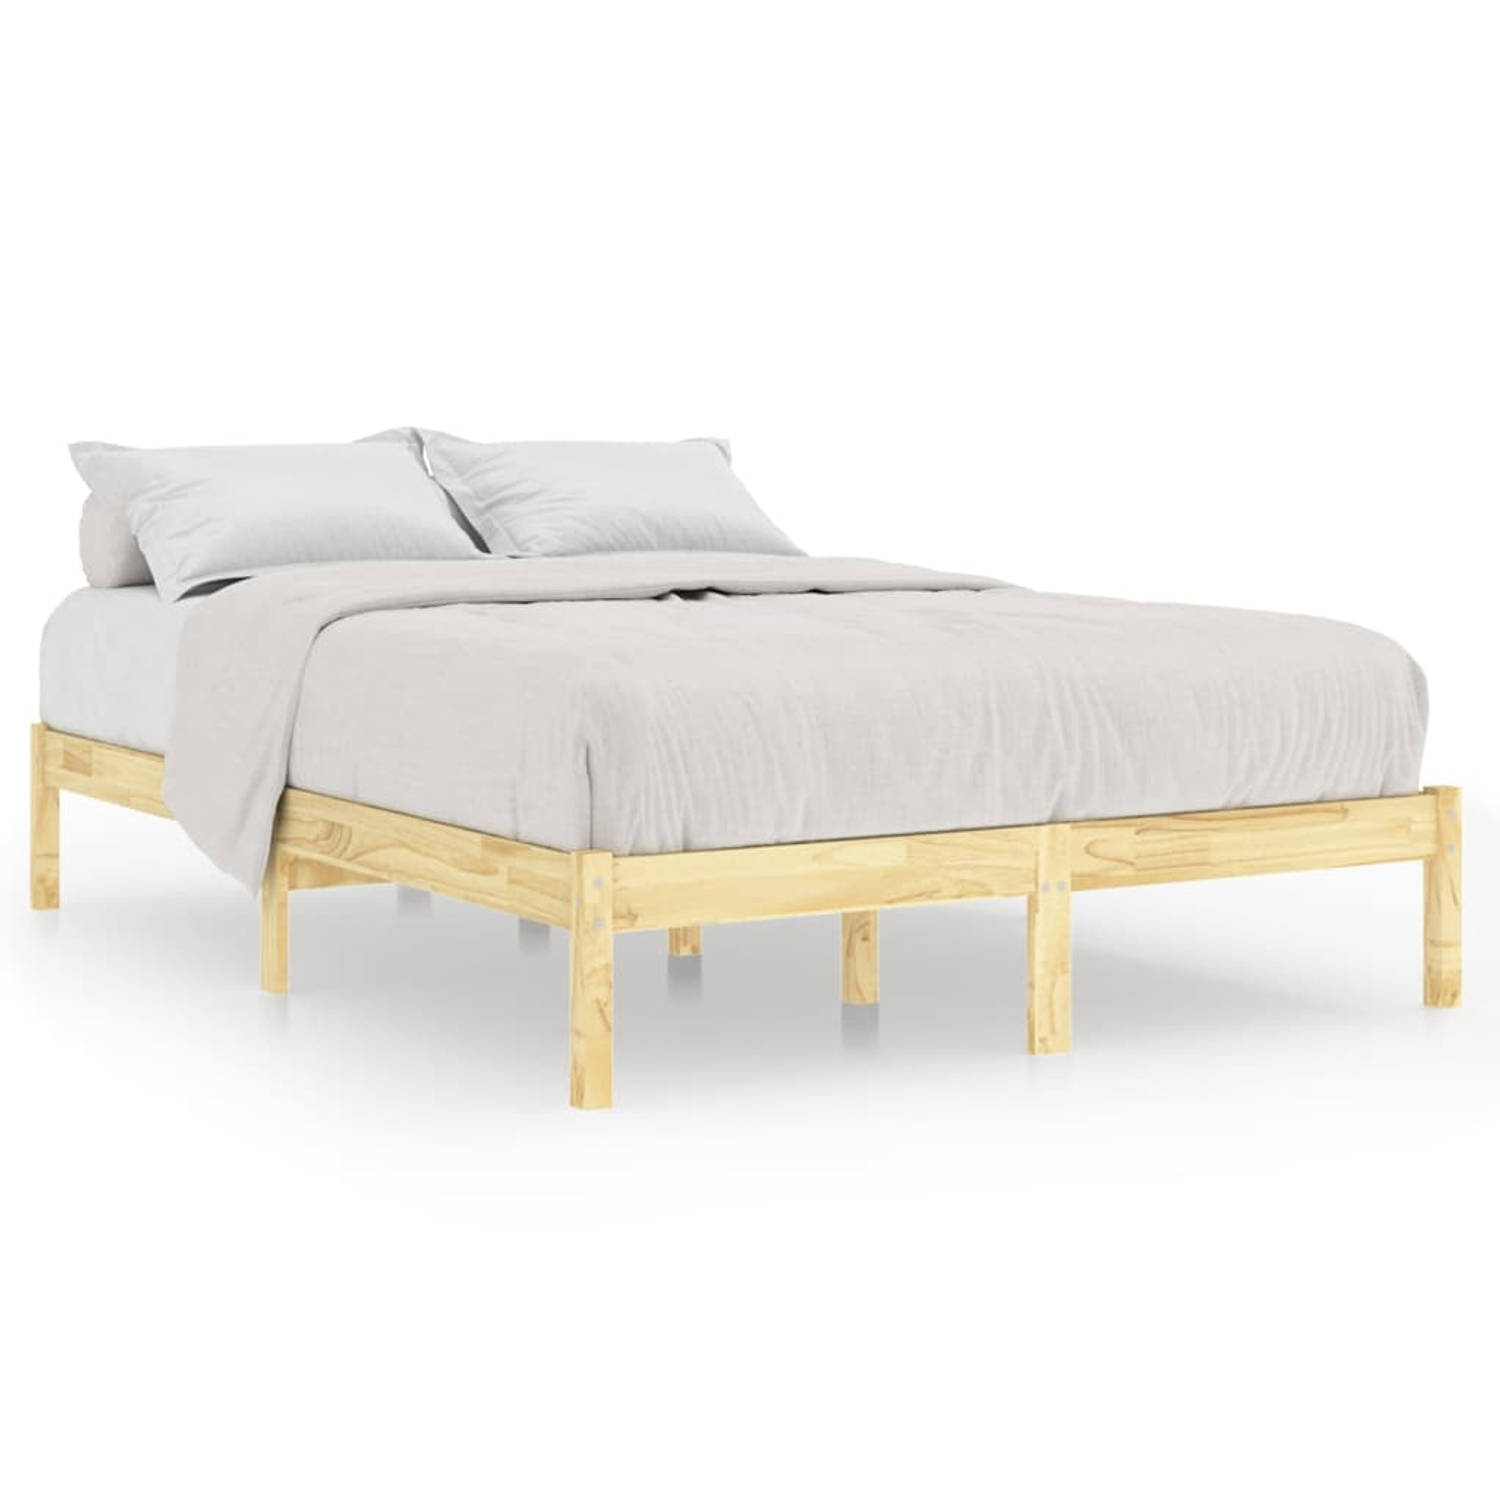 The Living Store Bedframe massief hout 135x190 cm 4FT6 Double - Bed